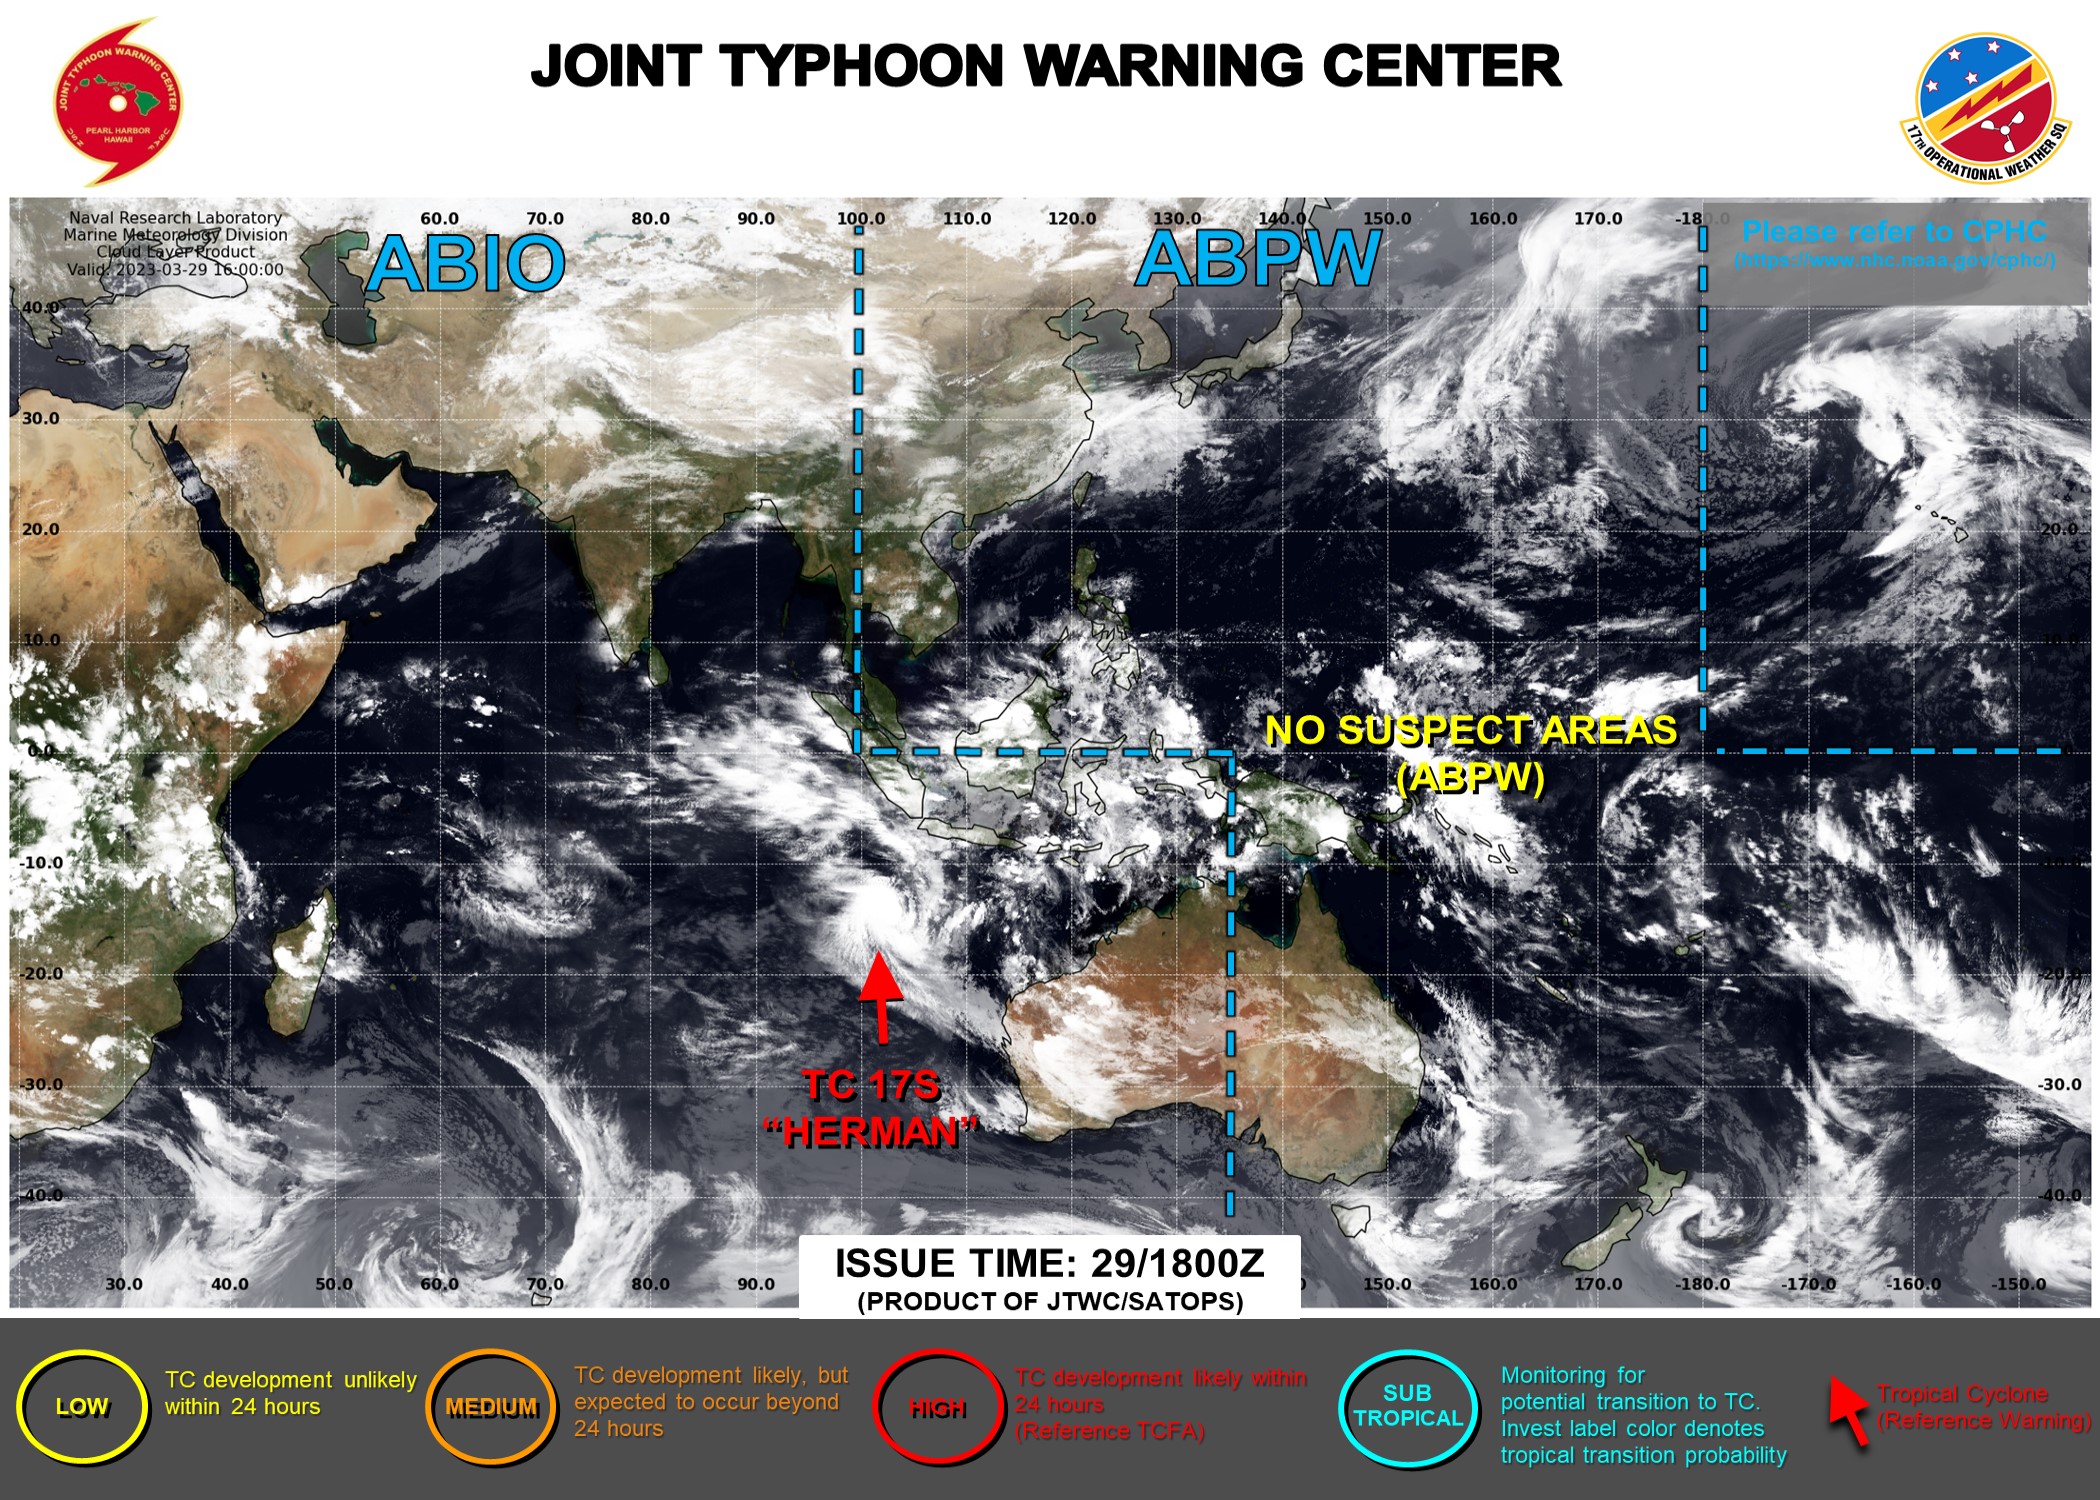 JTWC IS ISSUING 3HOURLY SATELLITE BULLETINS ON TC 17S(HERMAN).